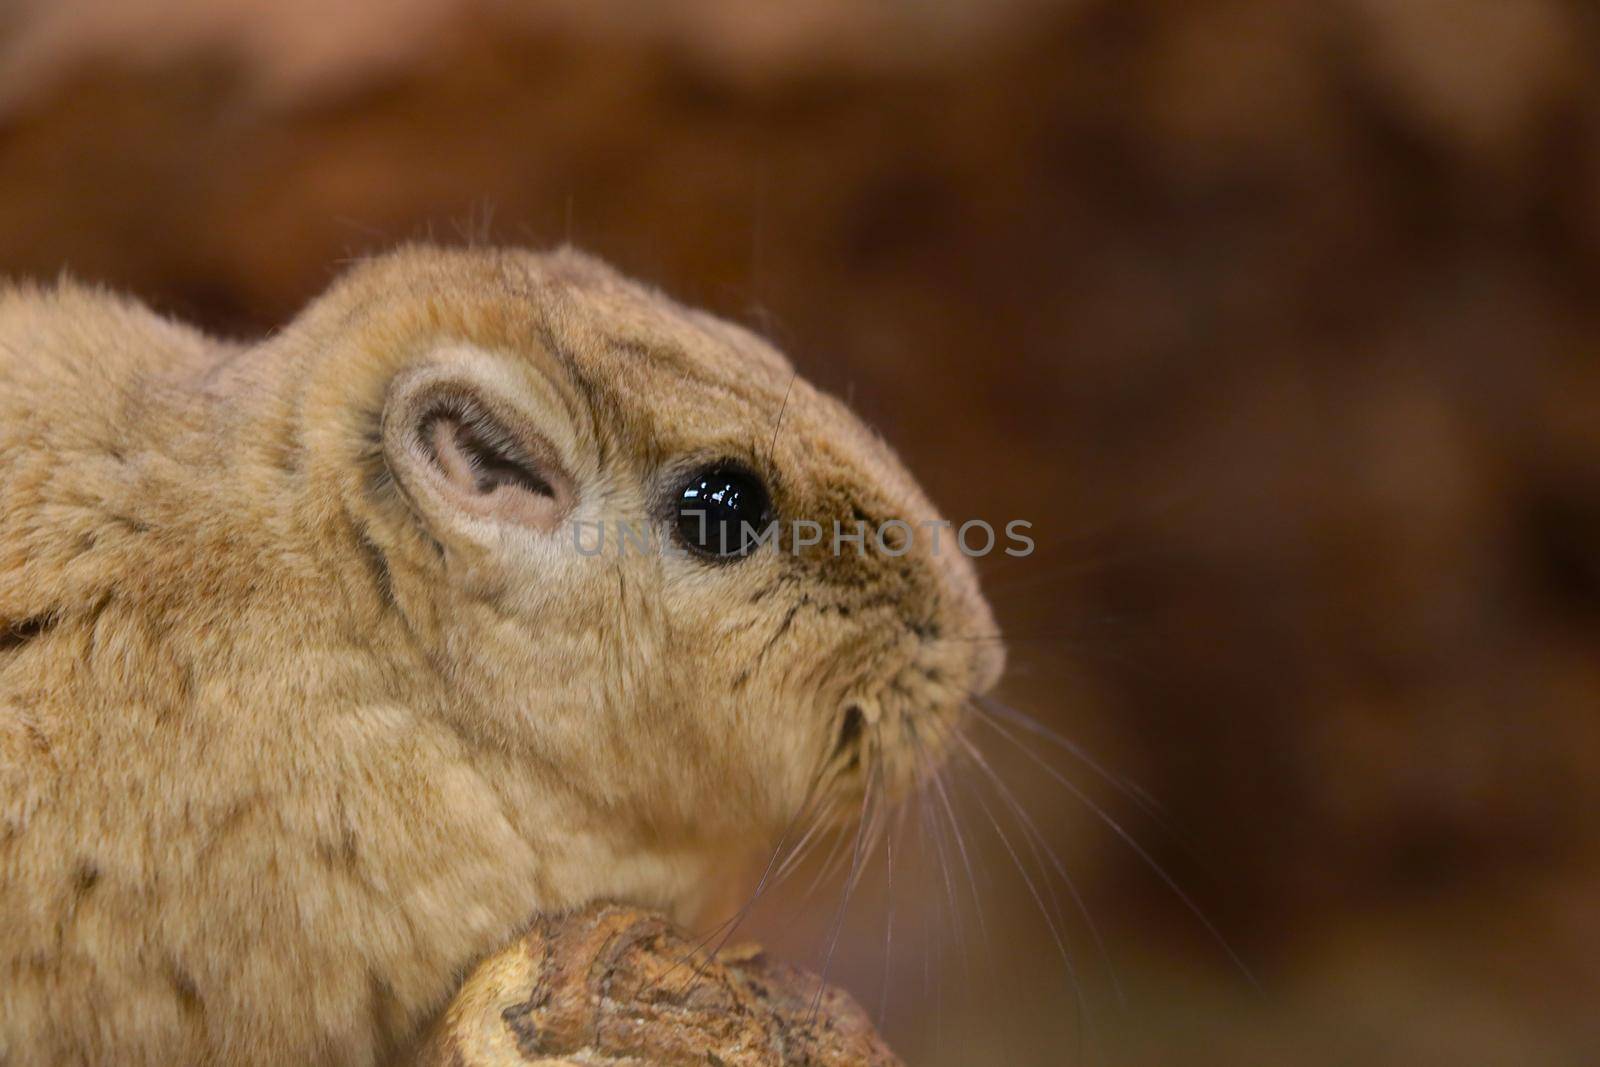 Gundi is a genus of rodents in the comb-toed family. by kip02kas